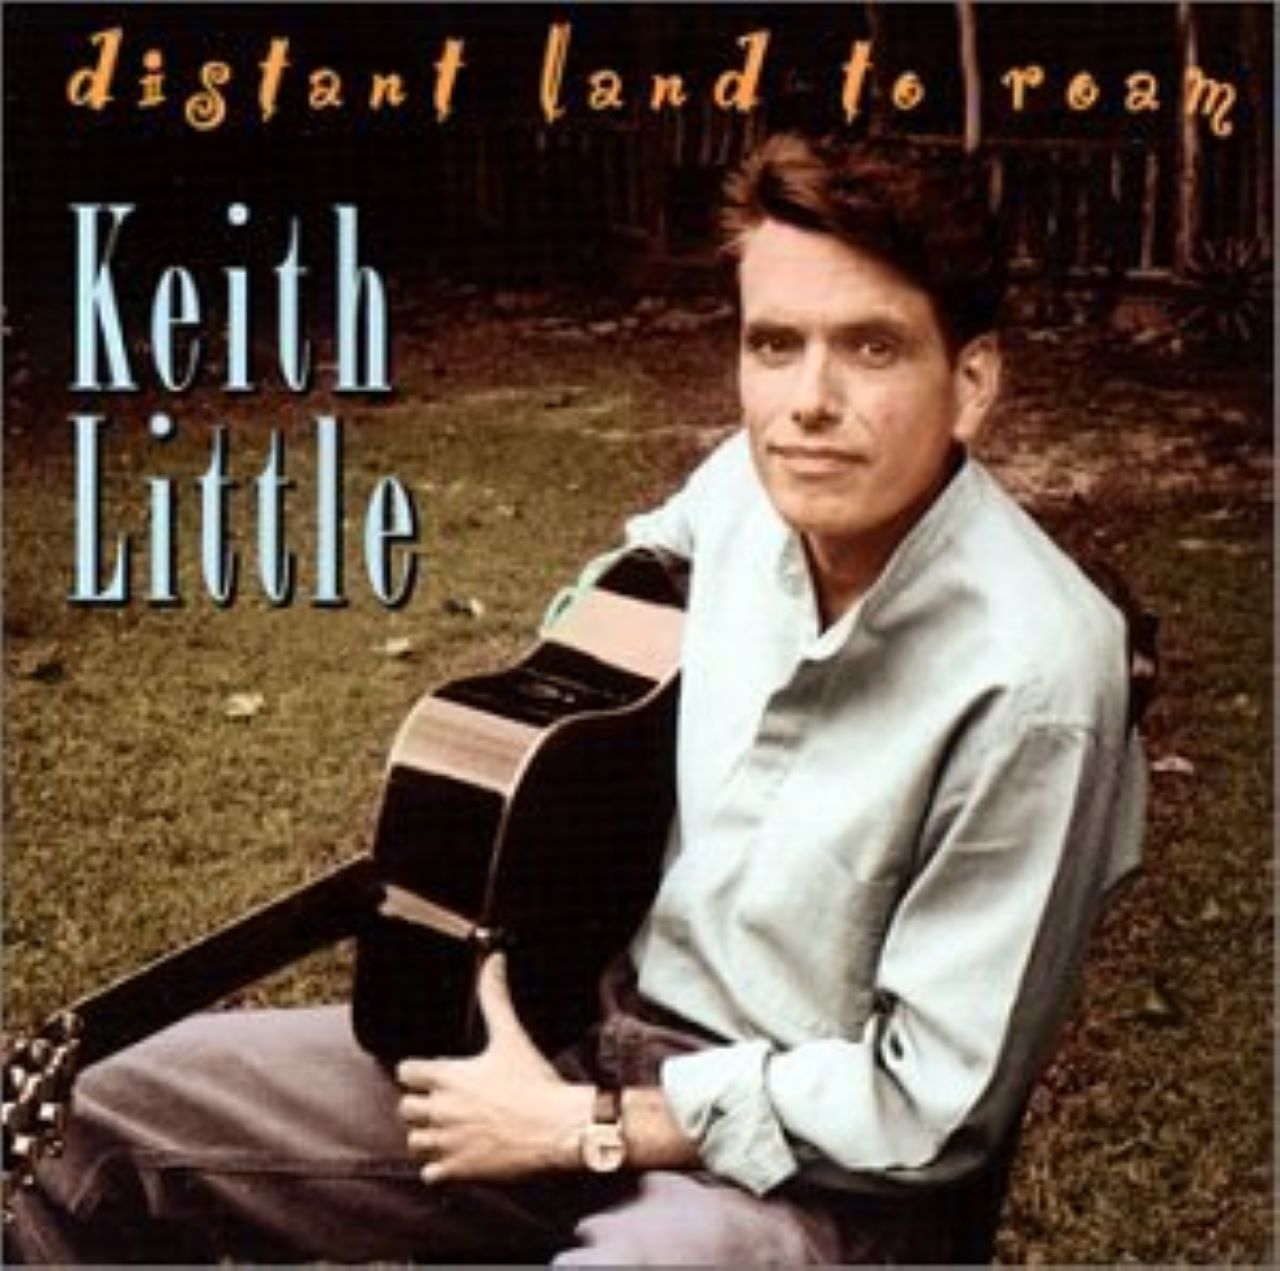 Keith Little - Distant Land To Roam cover album